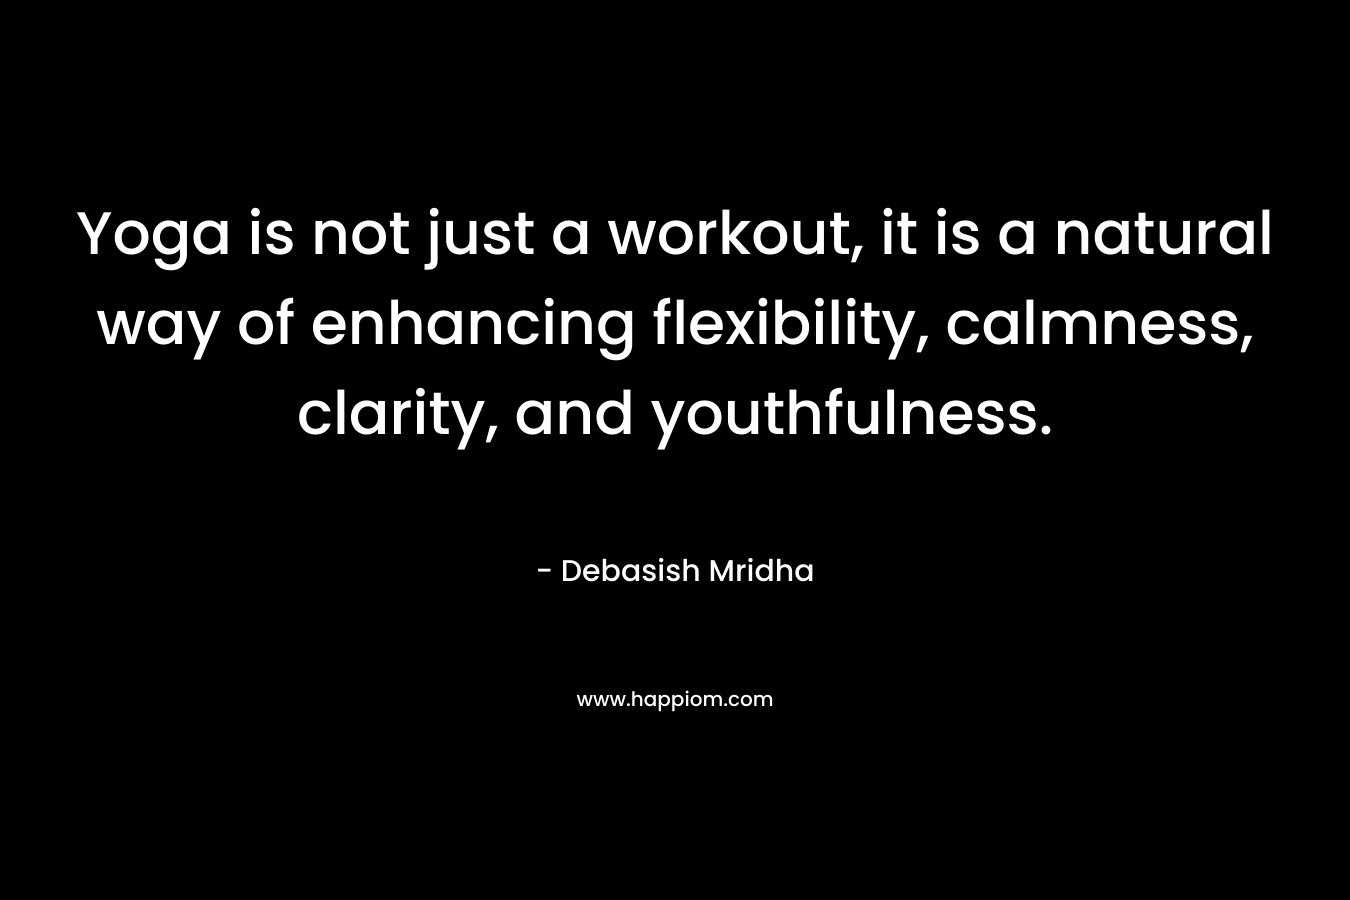 Yoga is not just a workout, it is a natural way of enhancing flexibility, calmness, clarity, and youthfulness. – Debasish Mridha